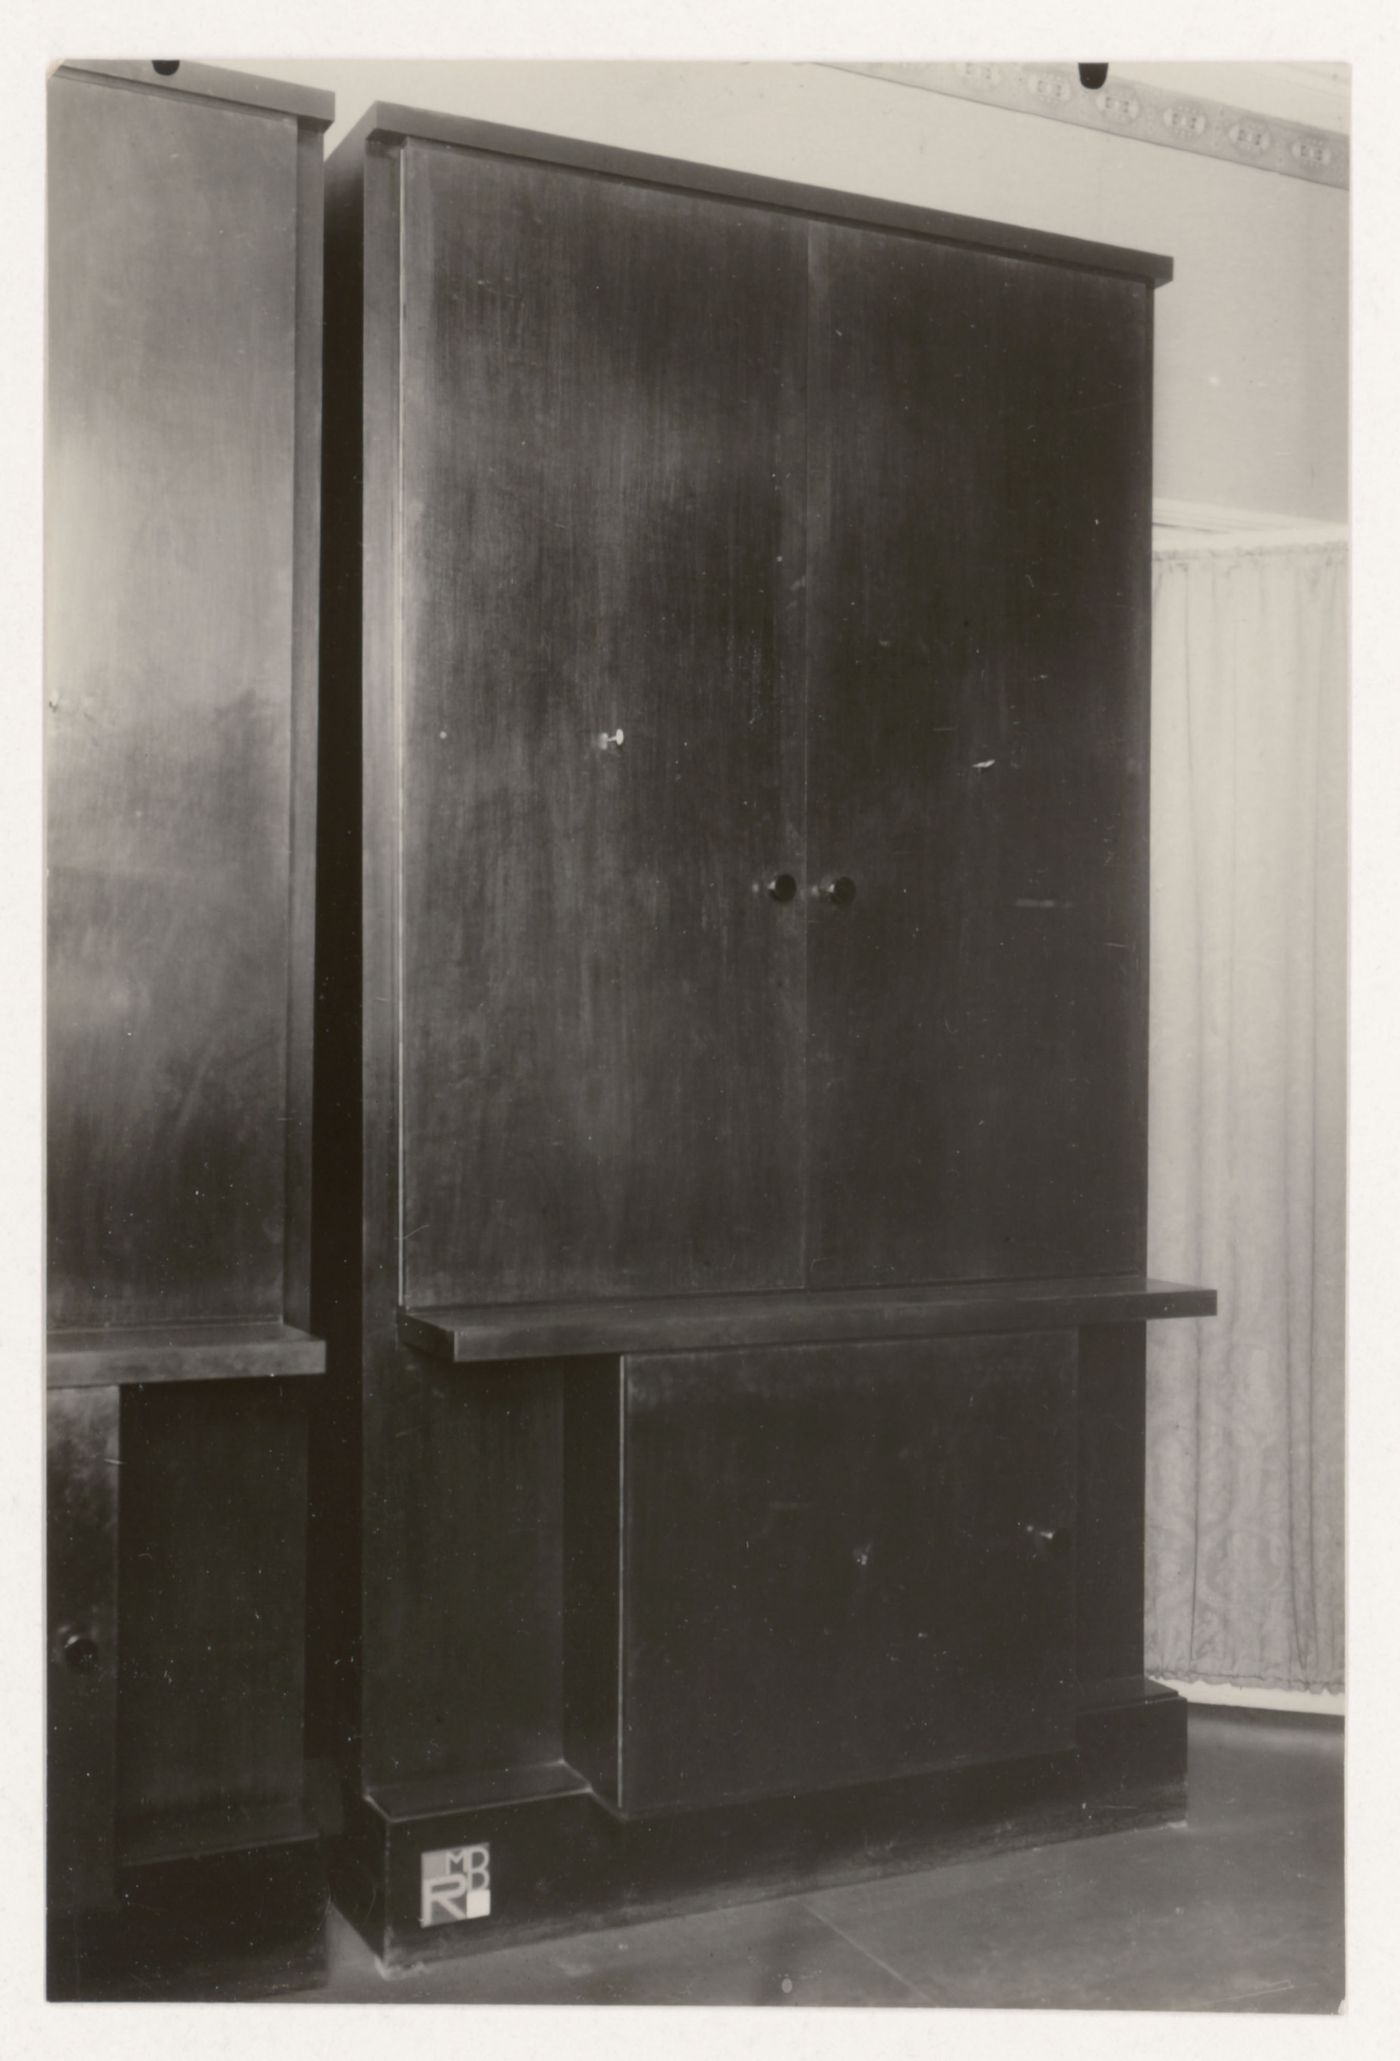 Partial view of a wood cabinet designed by J.J.P. Oud for museum Boymans, Rotterdam, Netherlands